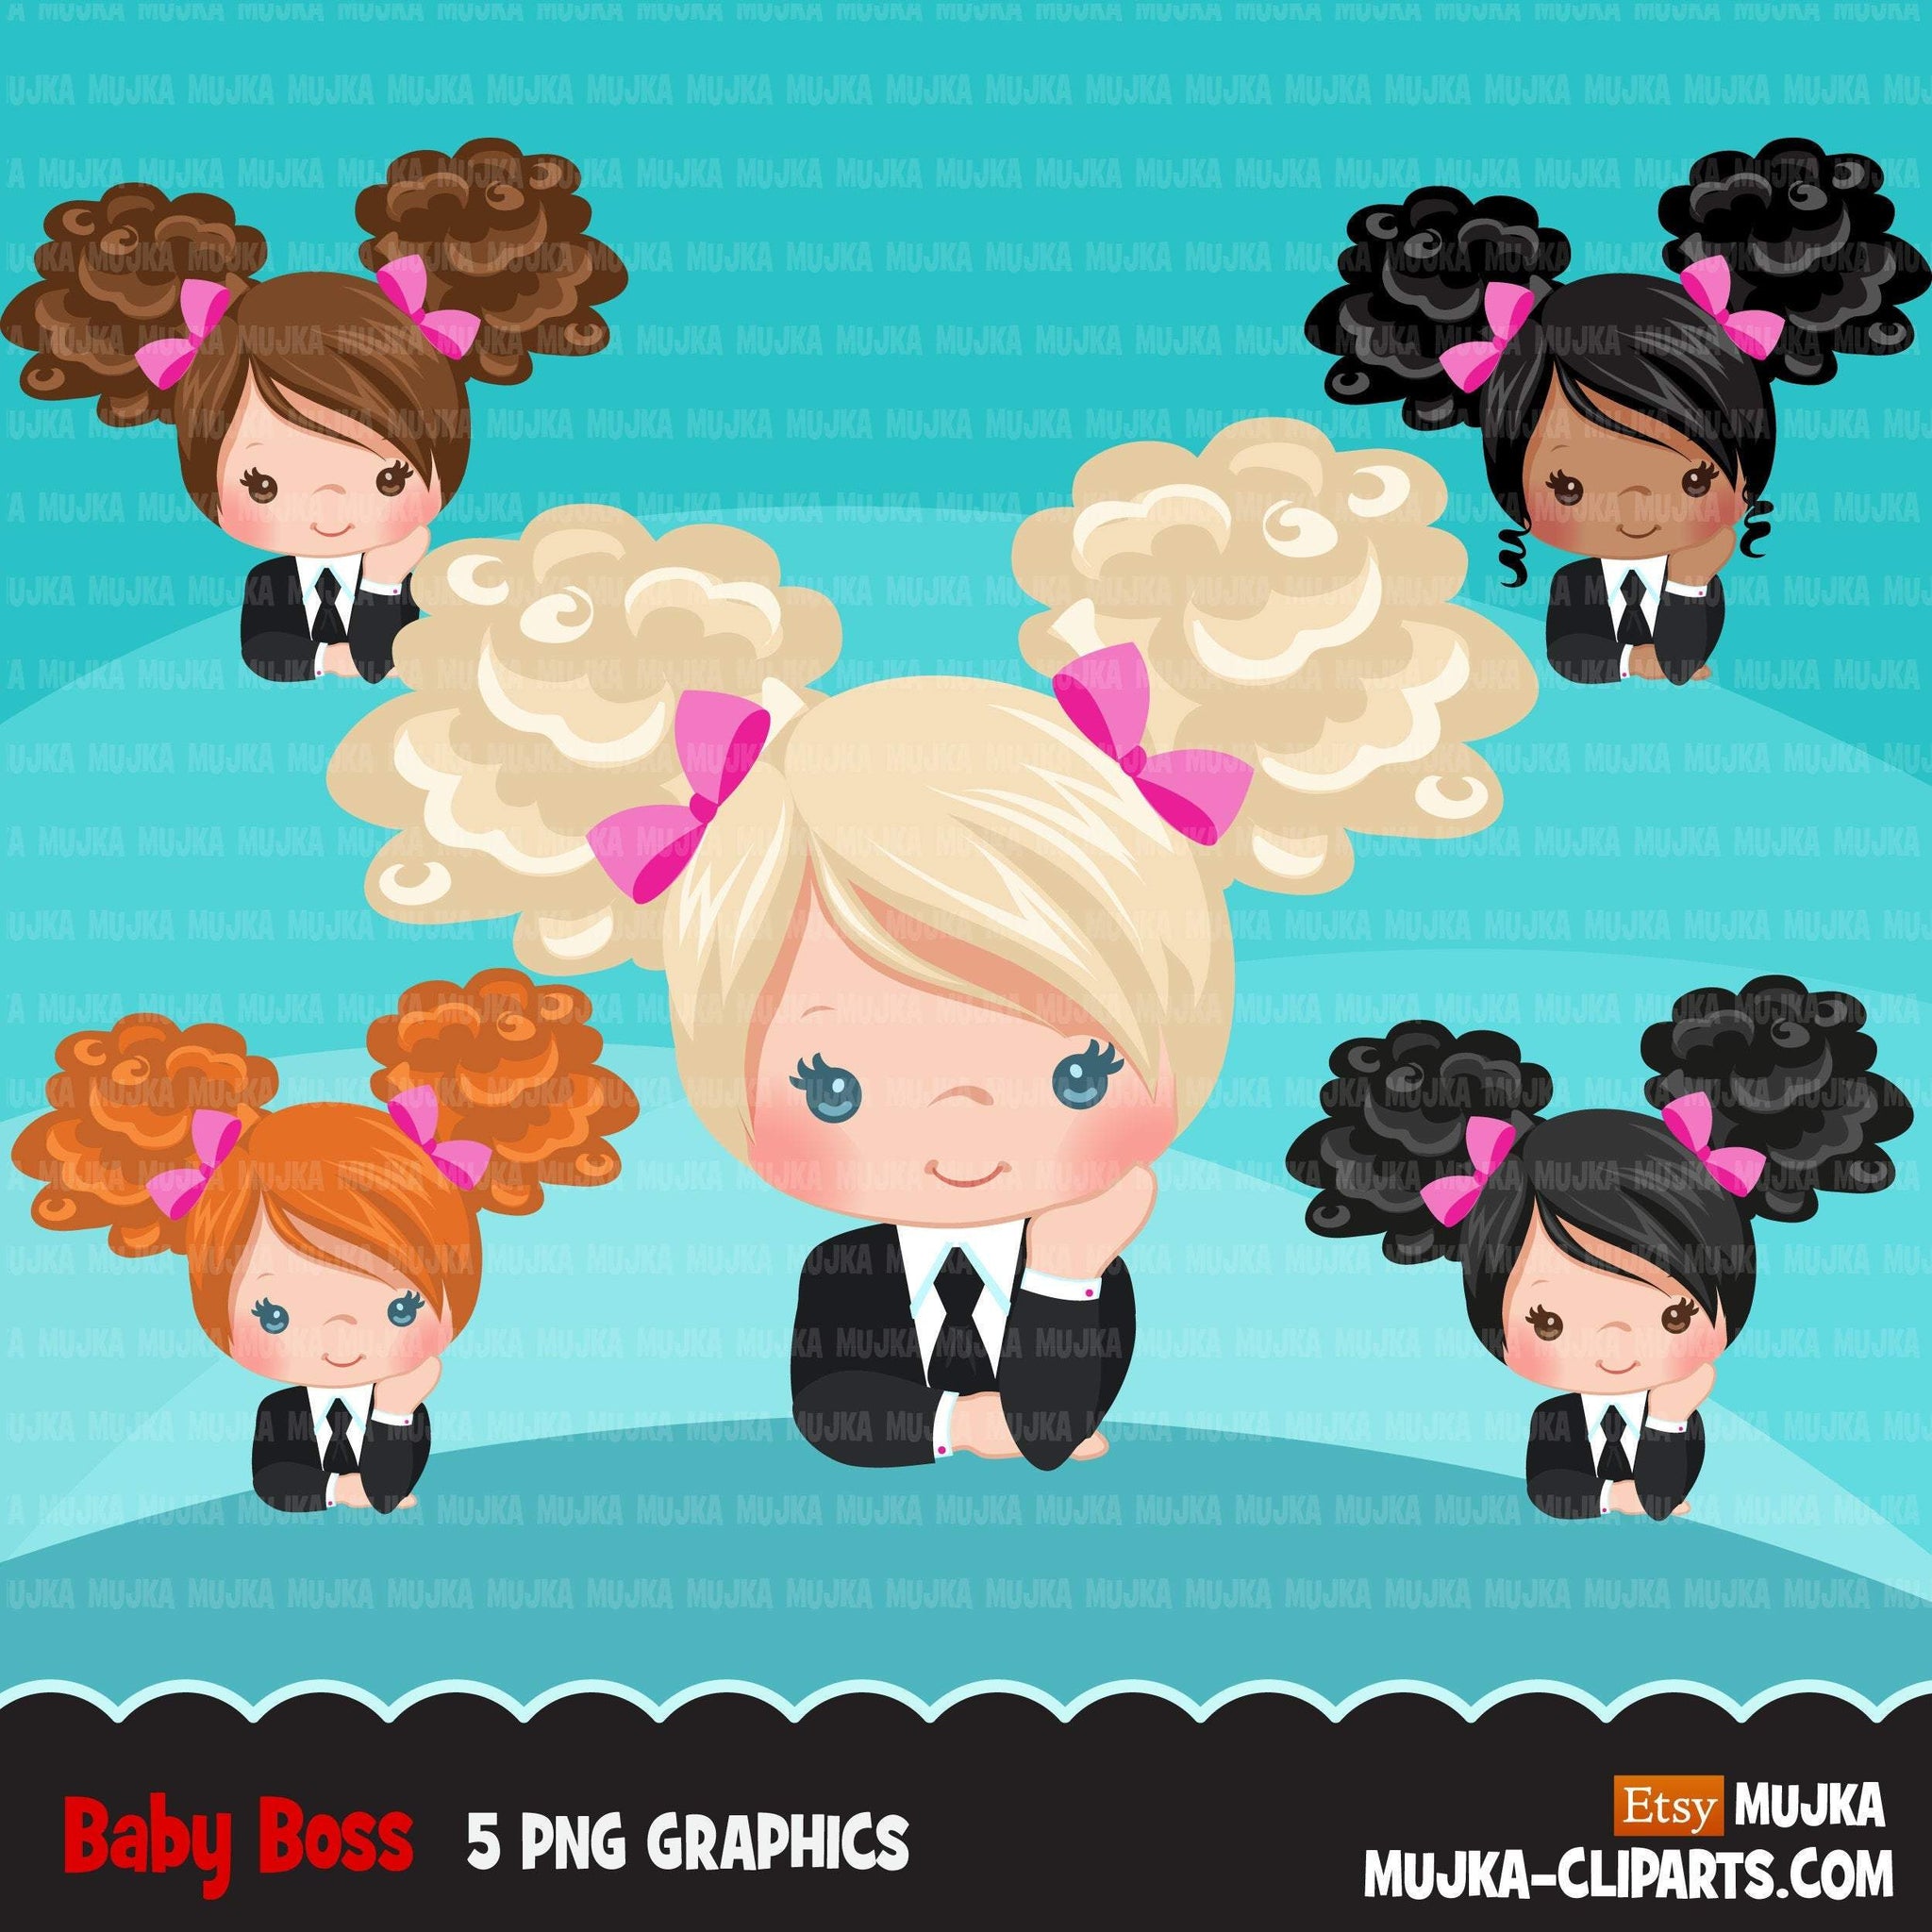 Boss baby clipart, toddler with business suit graphics, afro puff curly girls, commercial use clip art